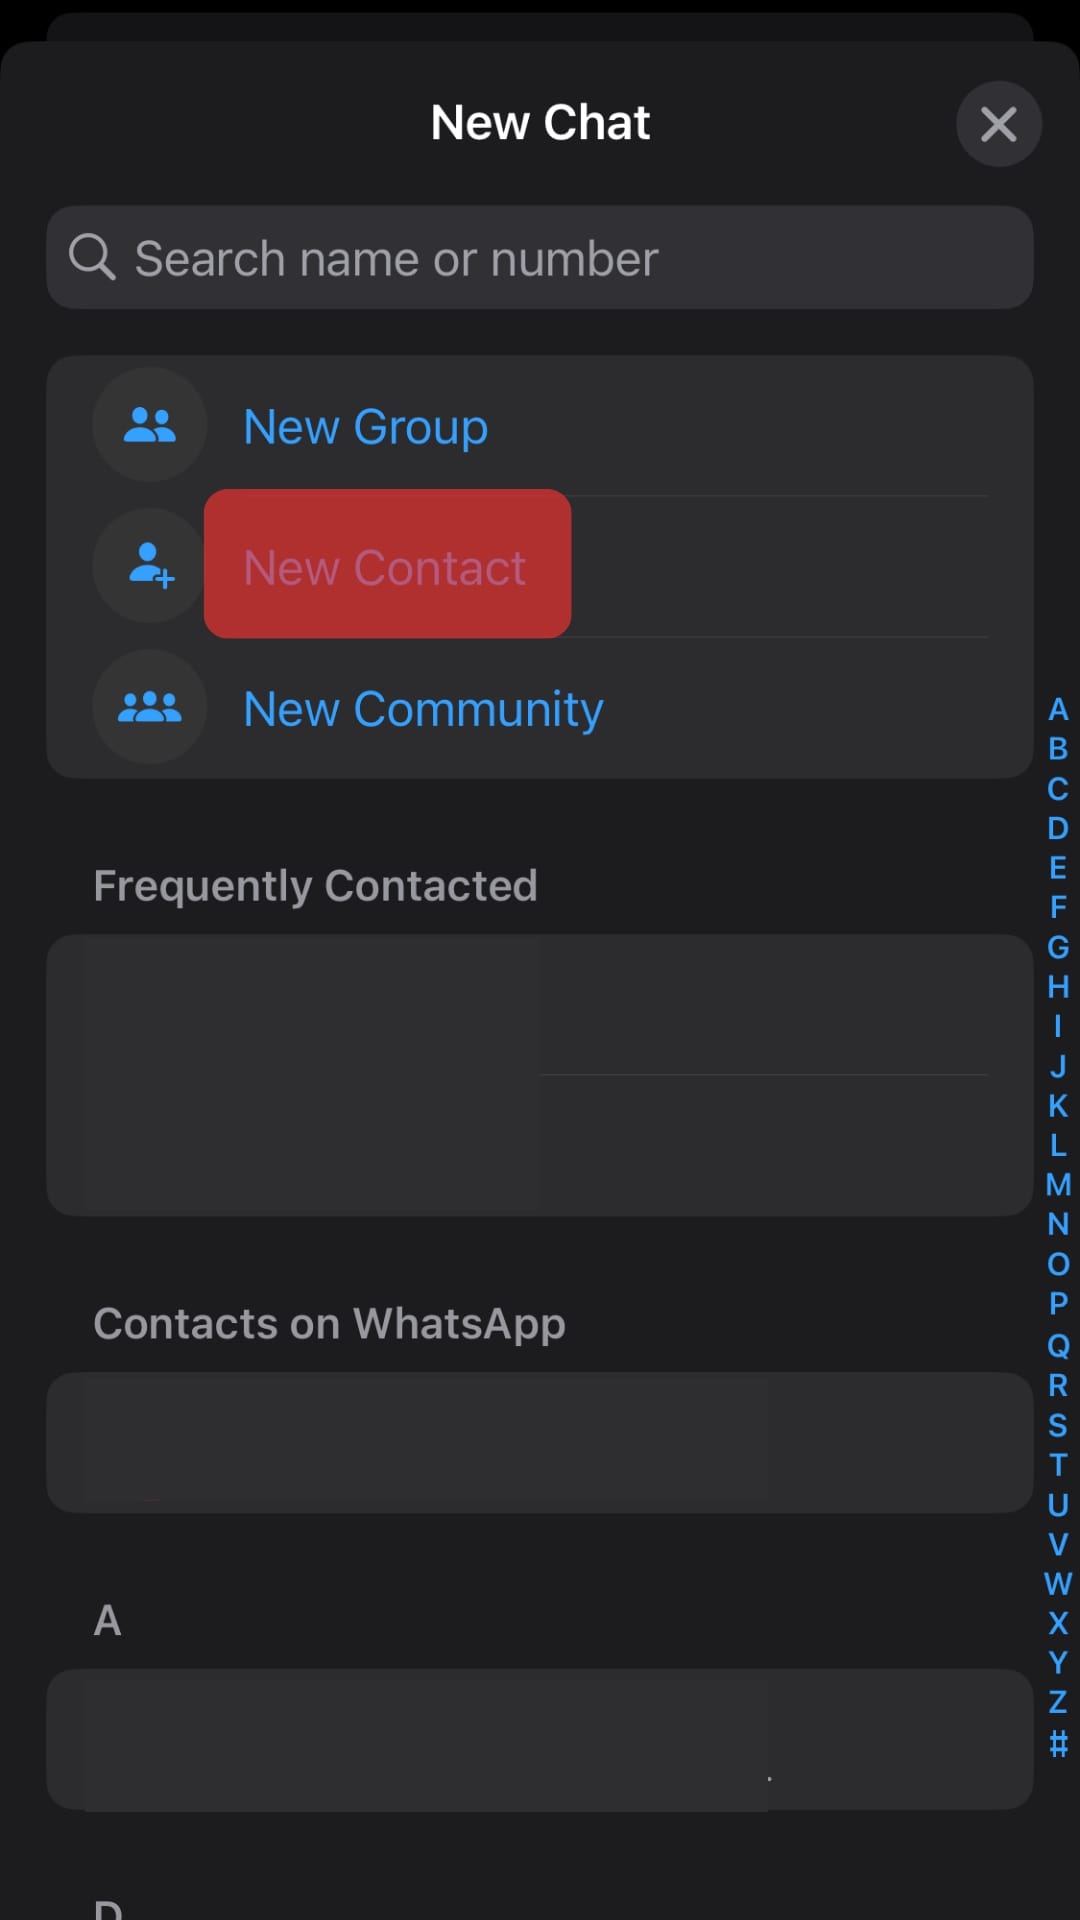 Select The New Contact Option.